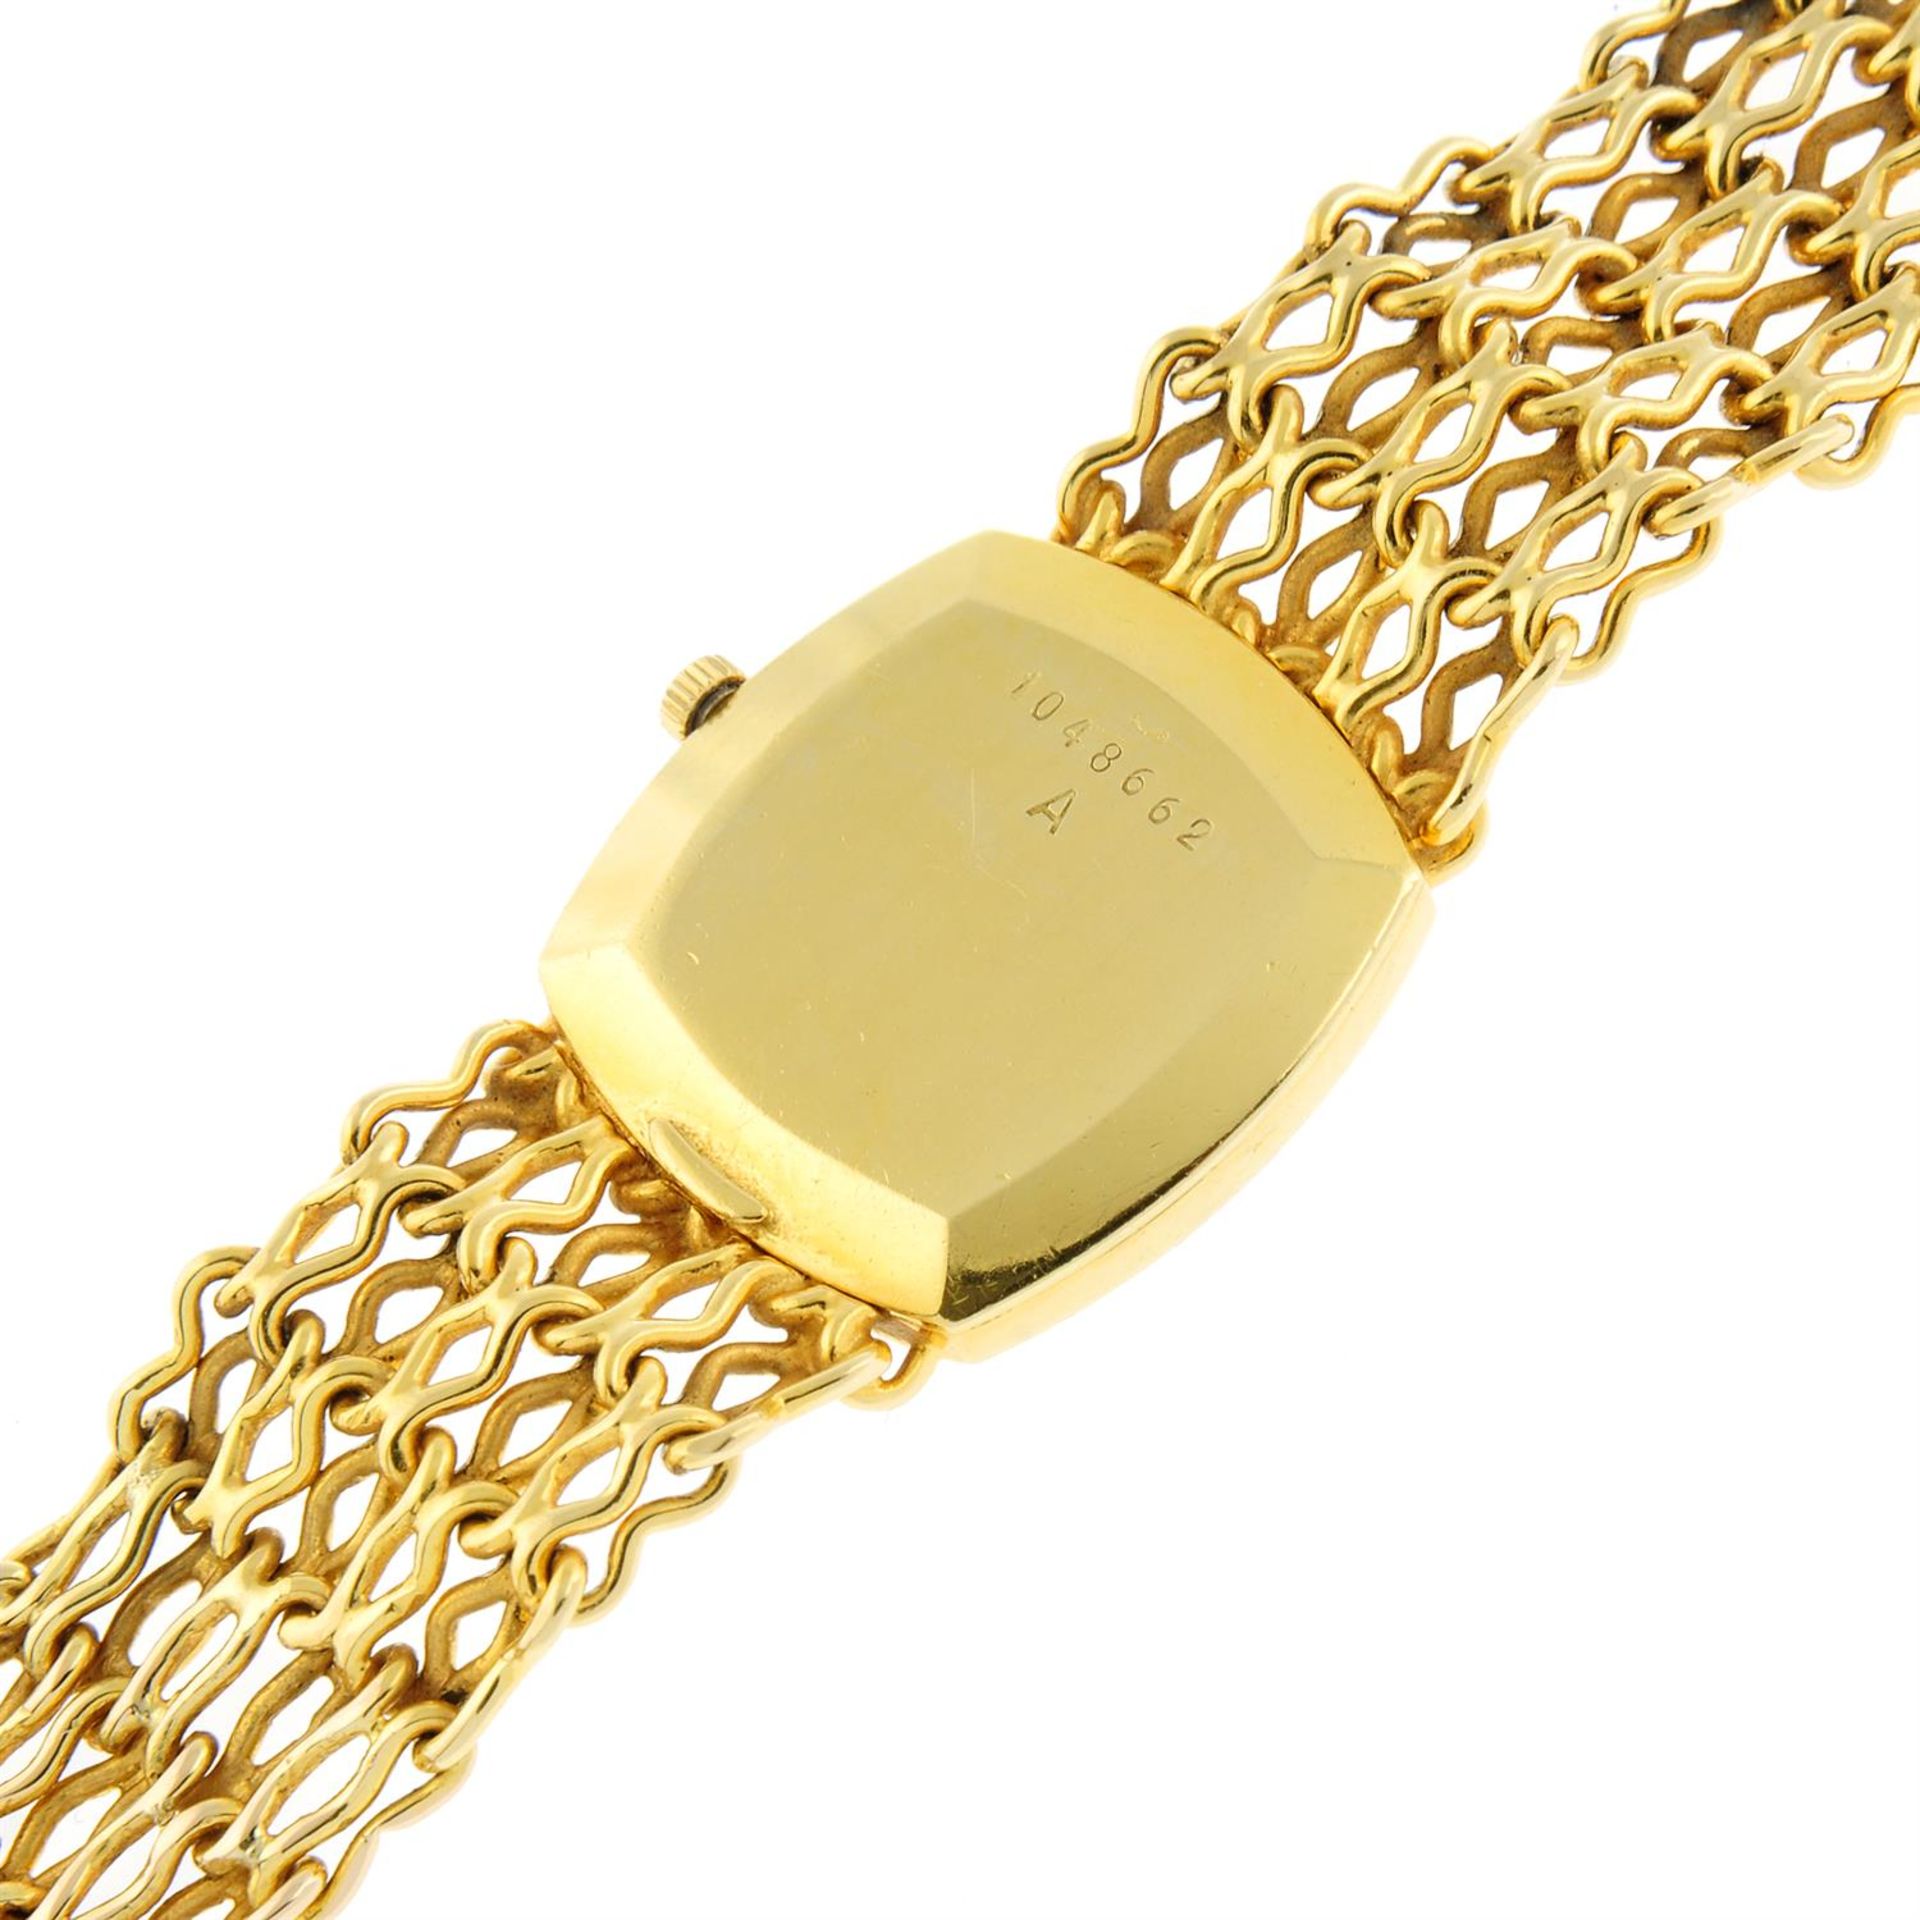 JAEGER-LECOULTRE - an 18ct yellow gold bracelet watch, 23mm. - Image 4 of 5